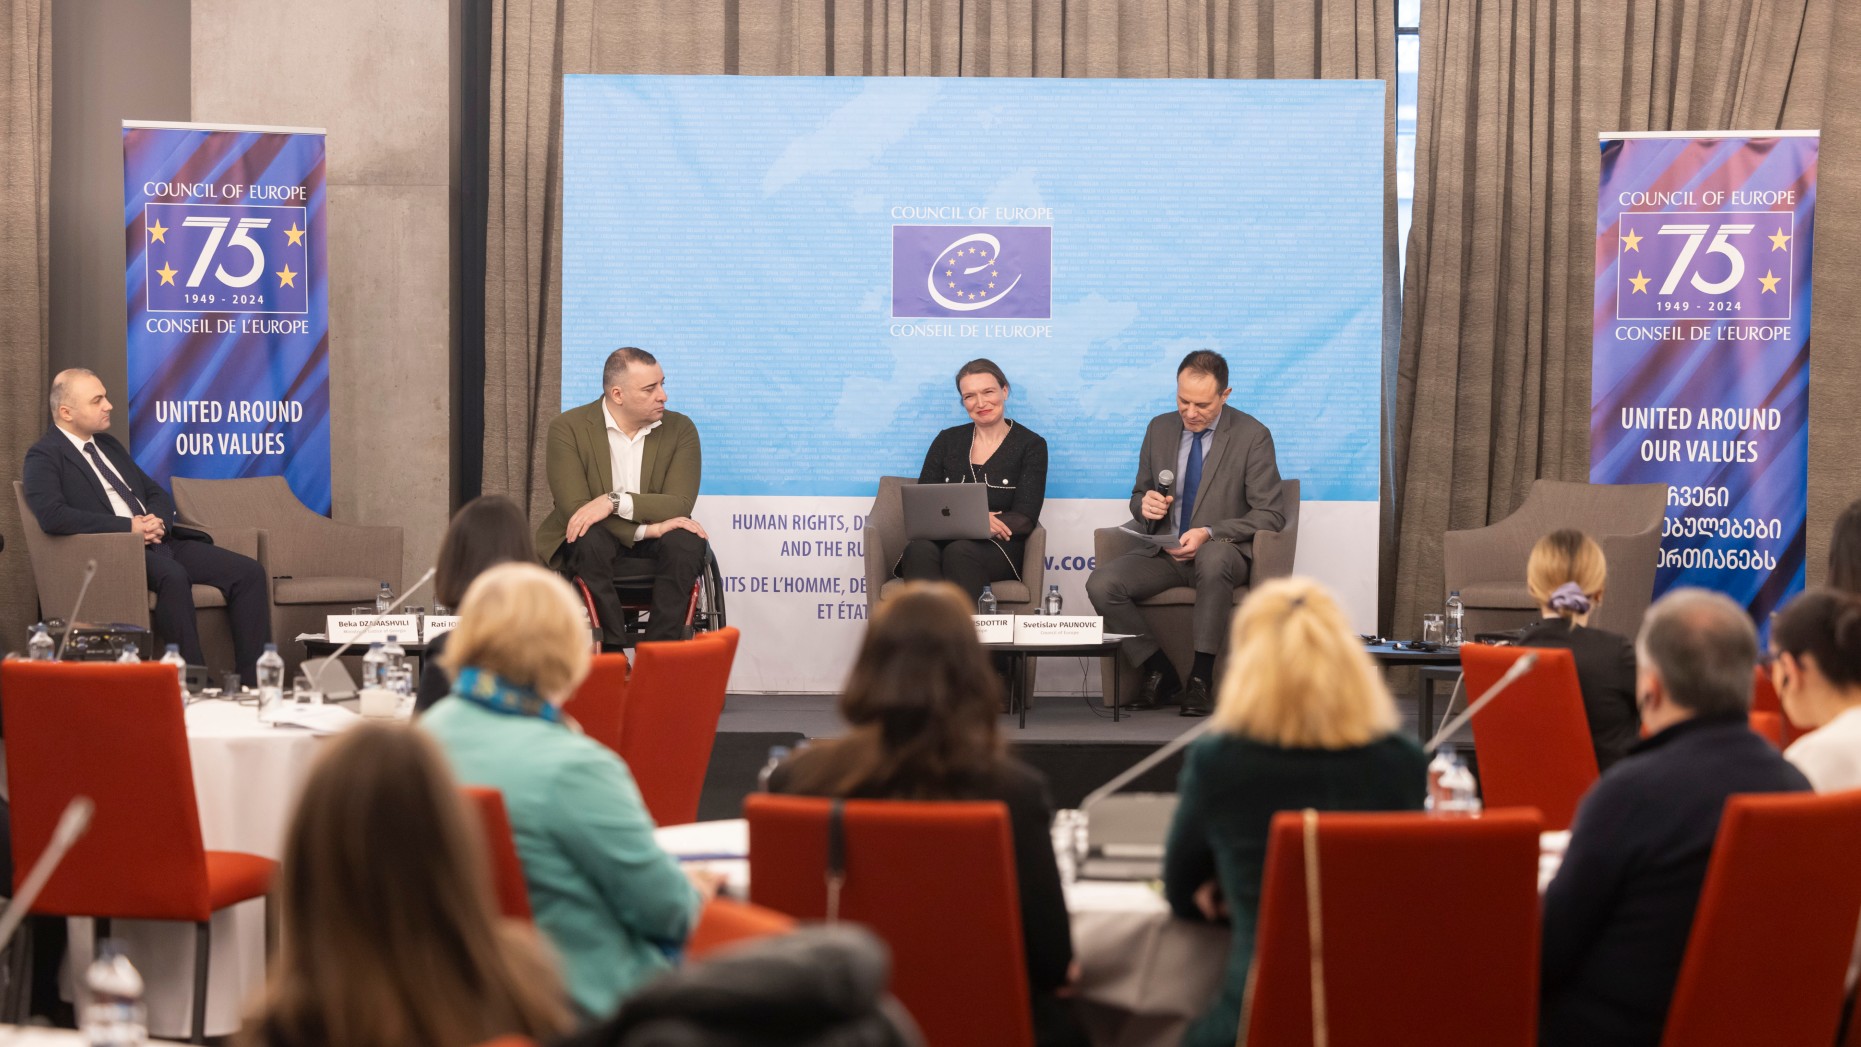 Council of Europe hosts a conference on execution of European Court of Human Rights judgments